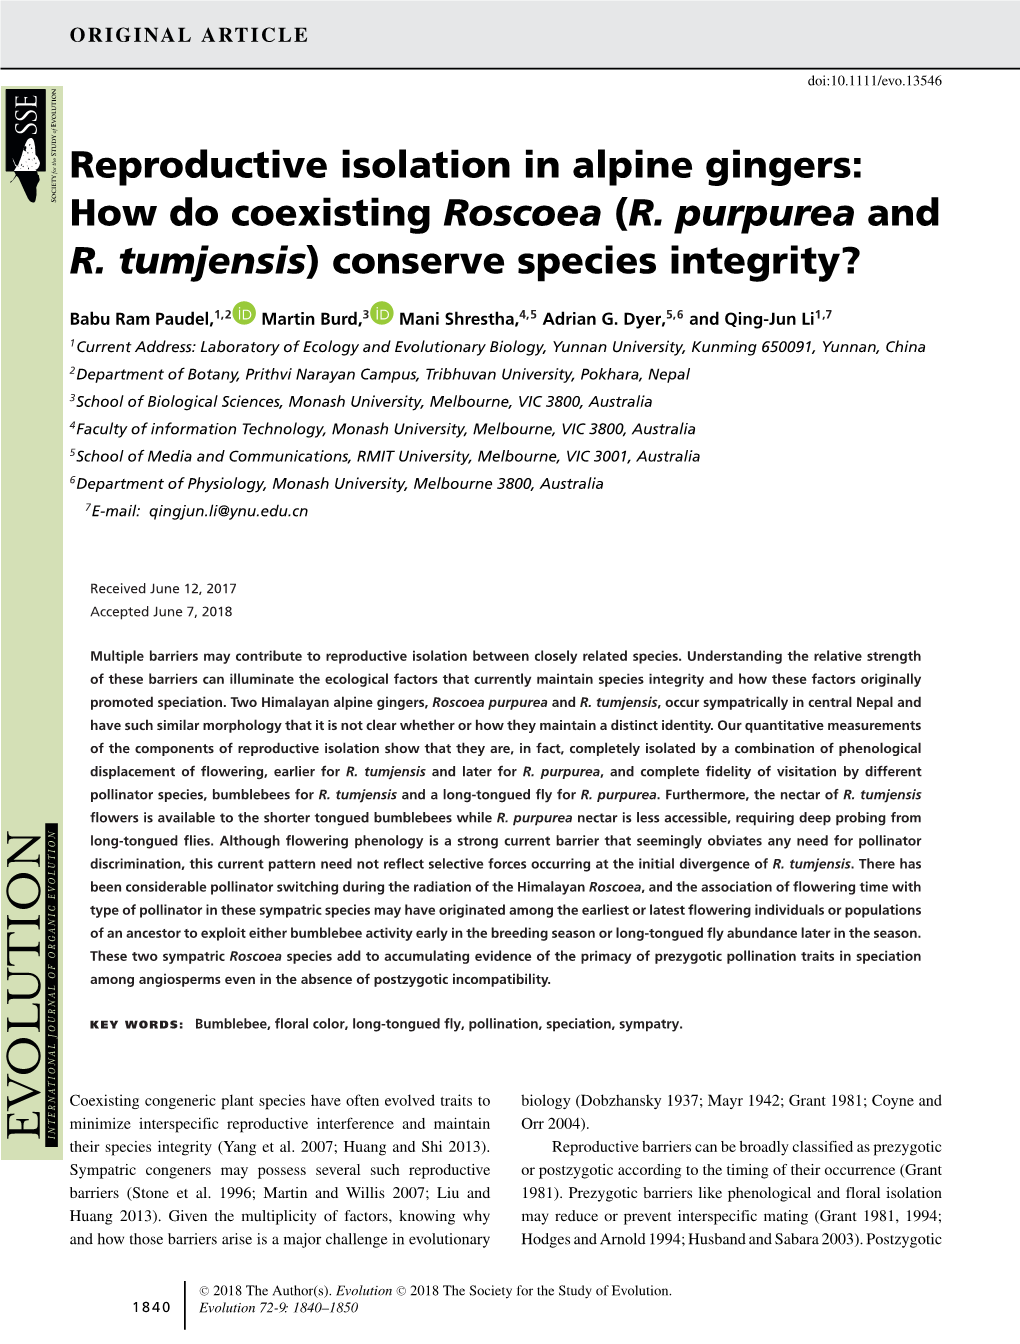 Reproductive Isolation in Alpine Gingers: How Do Coexisting Roscoea (R